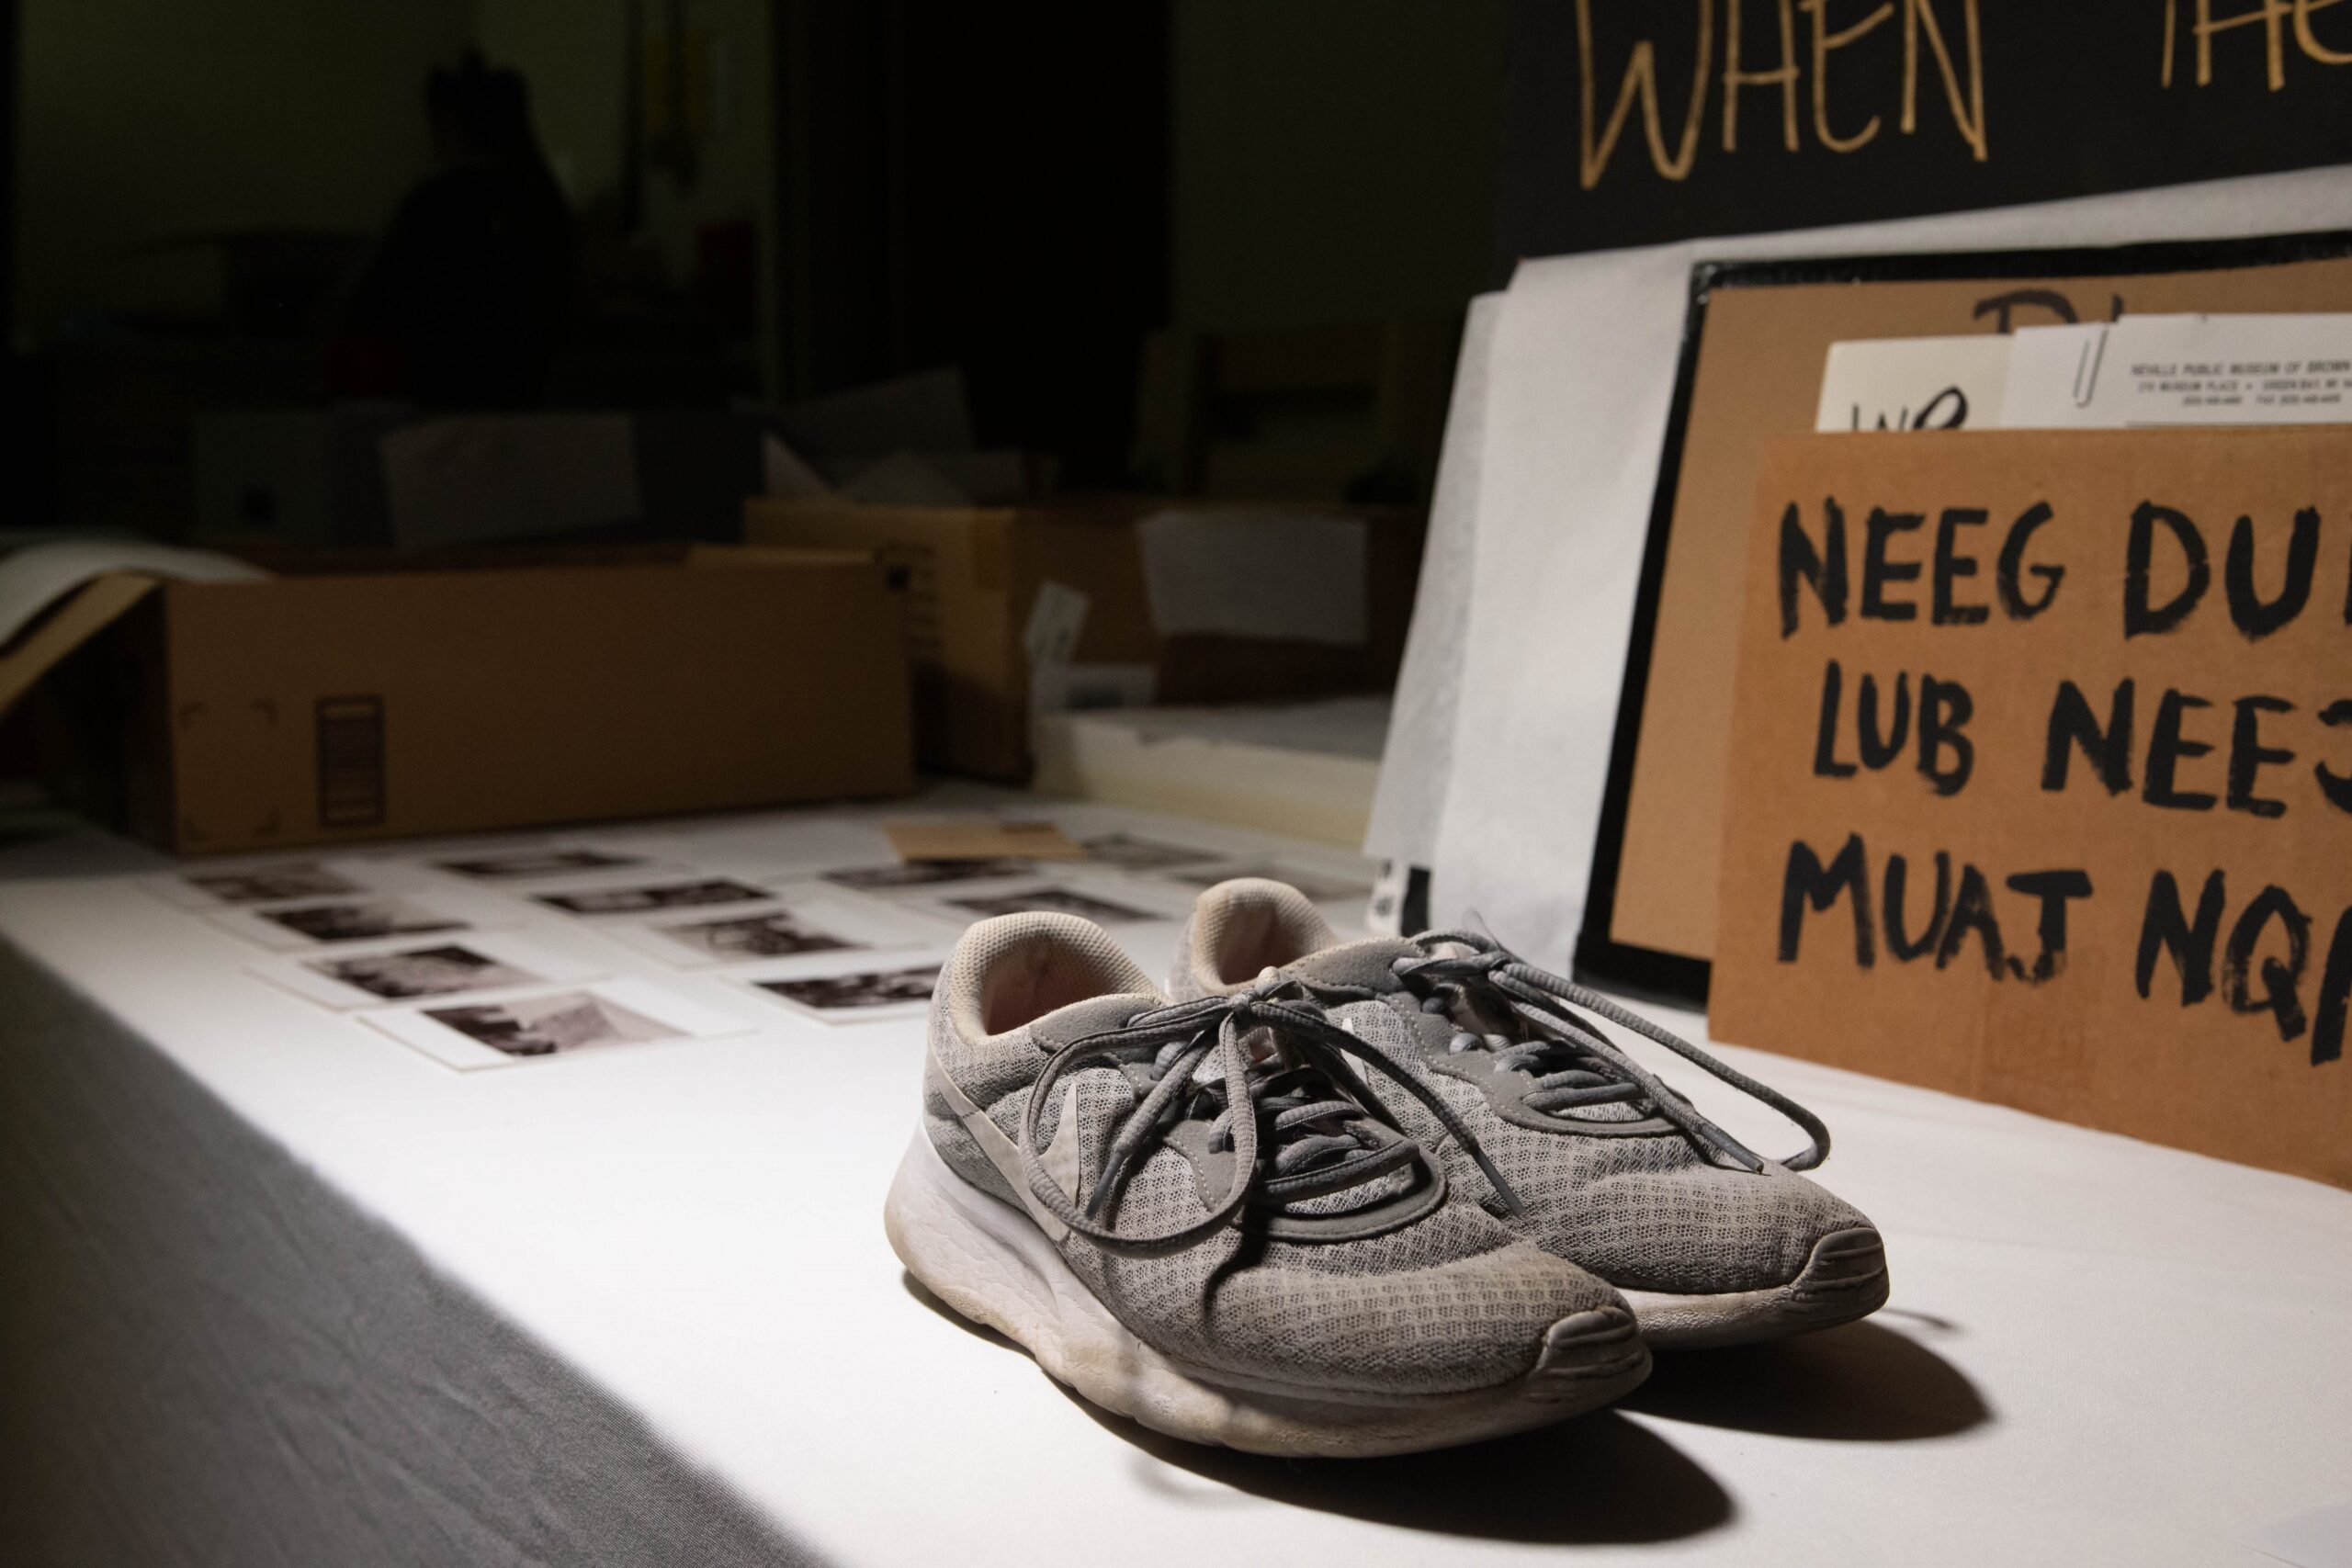 Items for processing at the Neville Public Museum in Green Bay include sneakers work at a 2020 protest